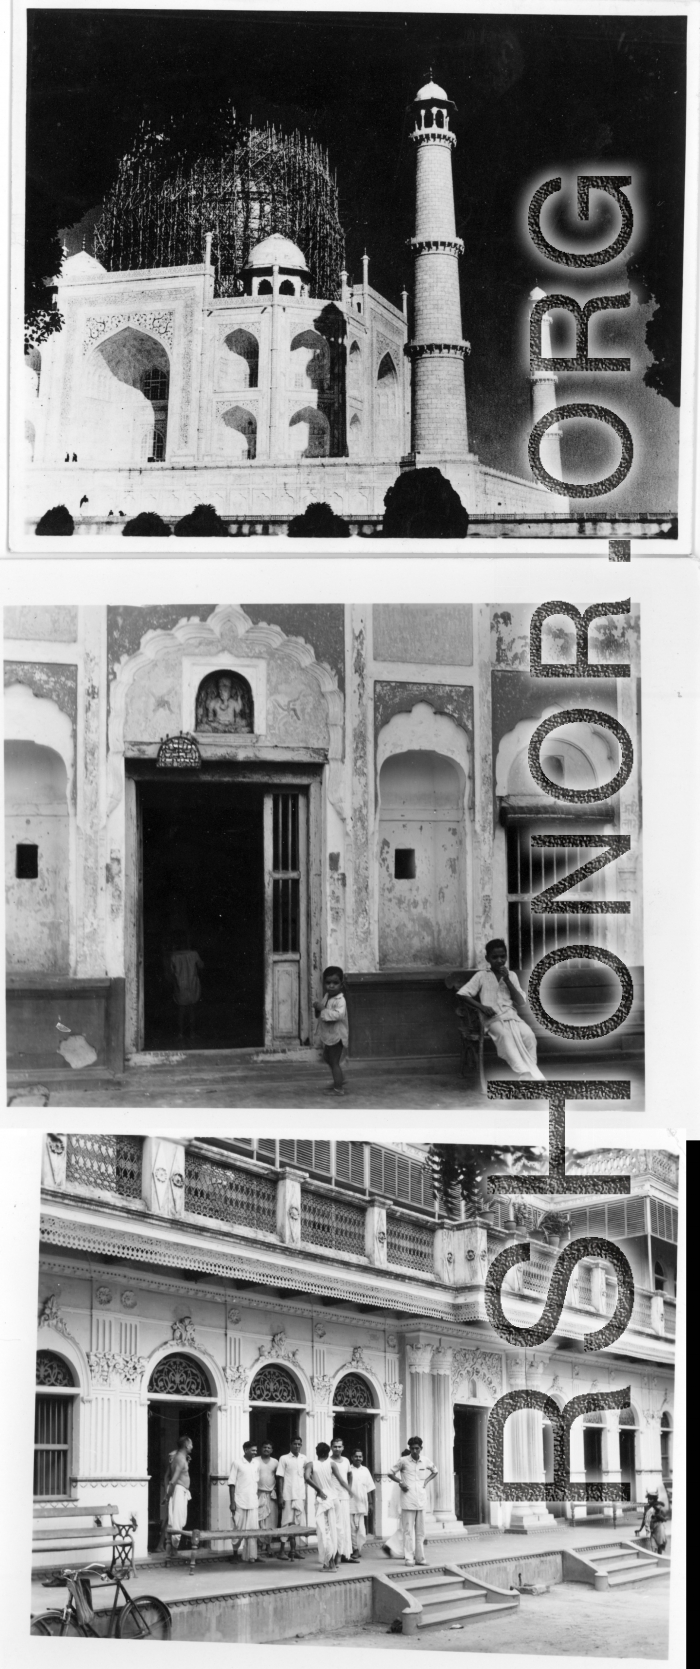 Taj Mahal under maintenance (top), and other buildings (below).  Scenes in India witnessed by American GIs during WWII. For many Americans of that era, with their limited experience traveling, the everyday sights and sounds overseas were new, intriguing, and photo worthy.